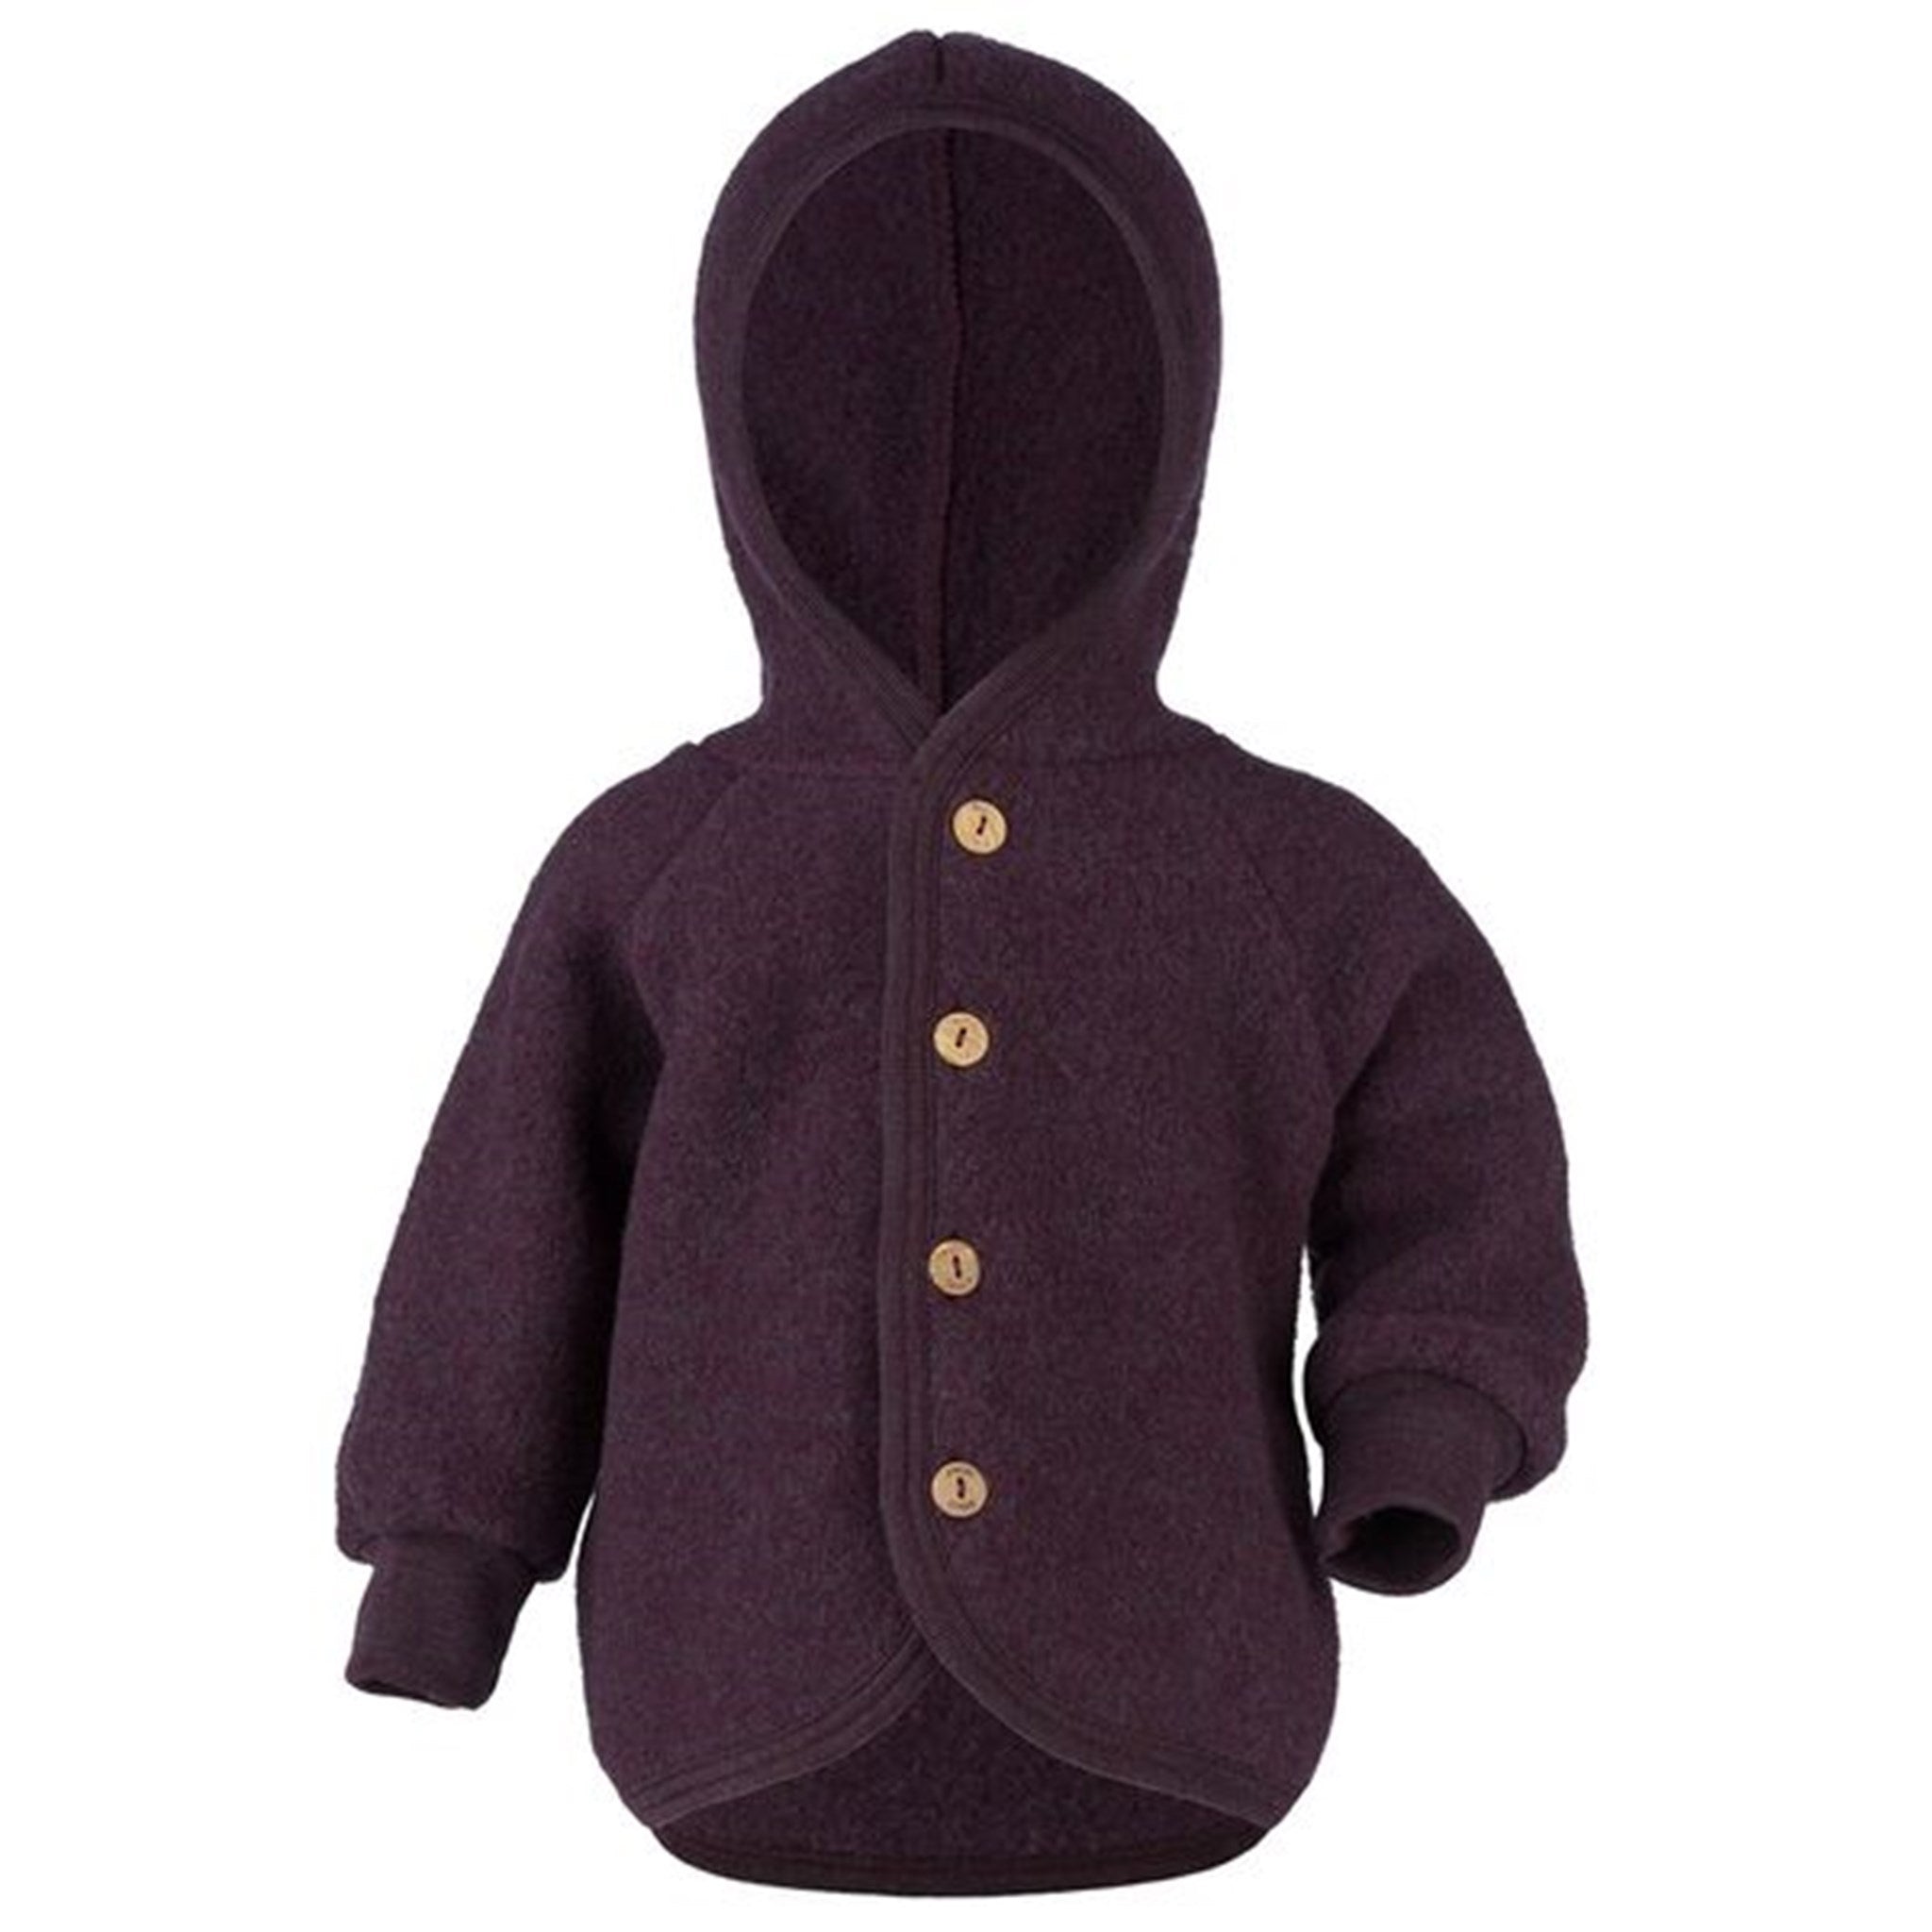 Engel Hooded Jacket with Wooden Buttons Lilac Mélange